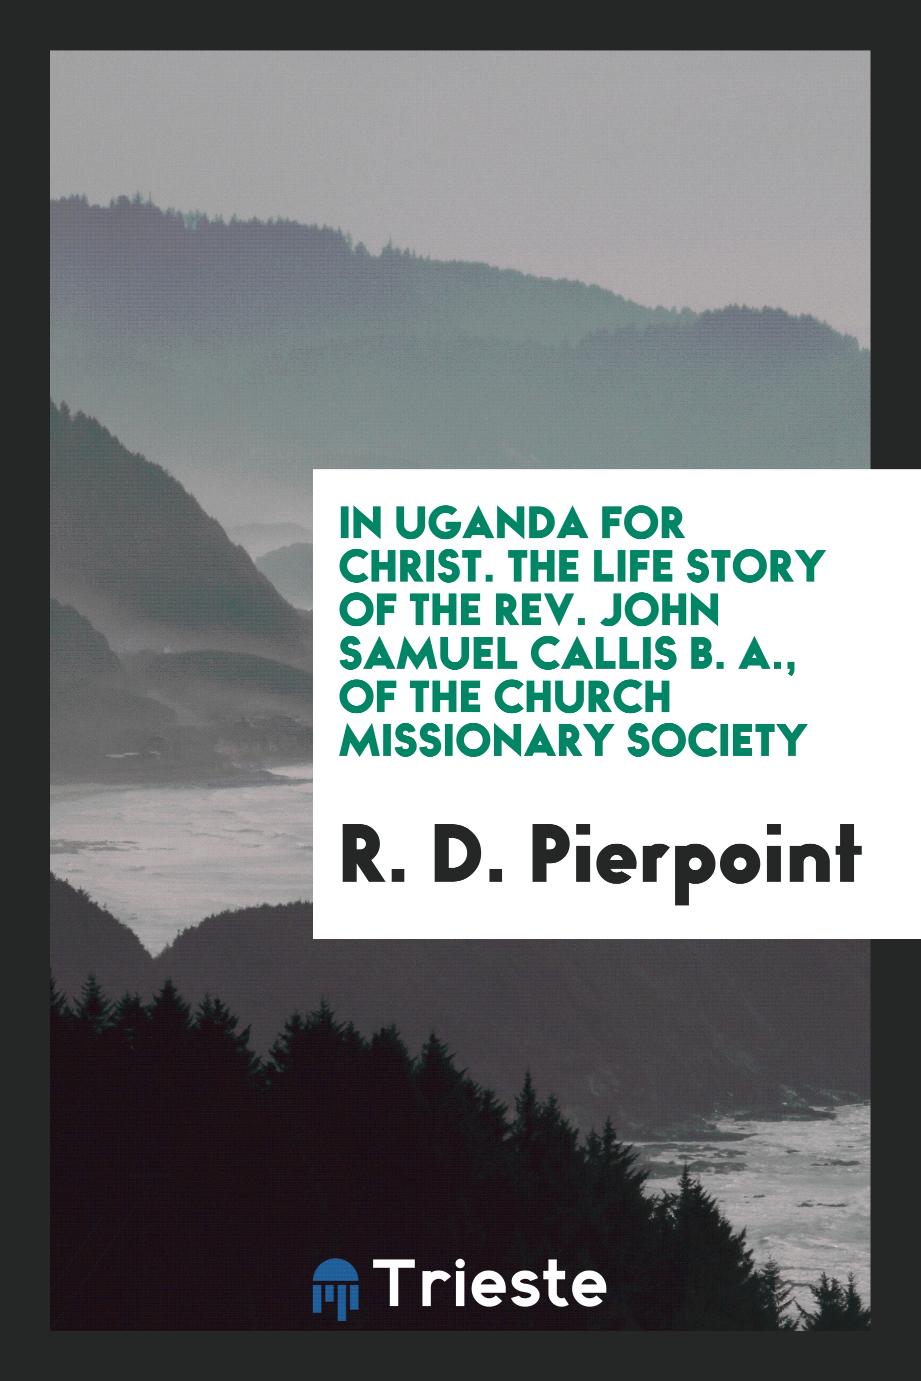 In Uganda for Christ. The Life Story of the Rev. John Samuel Callis B. A., of the Church Missionary Society